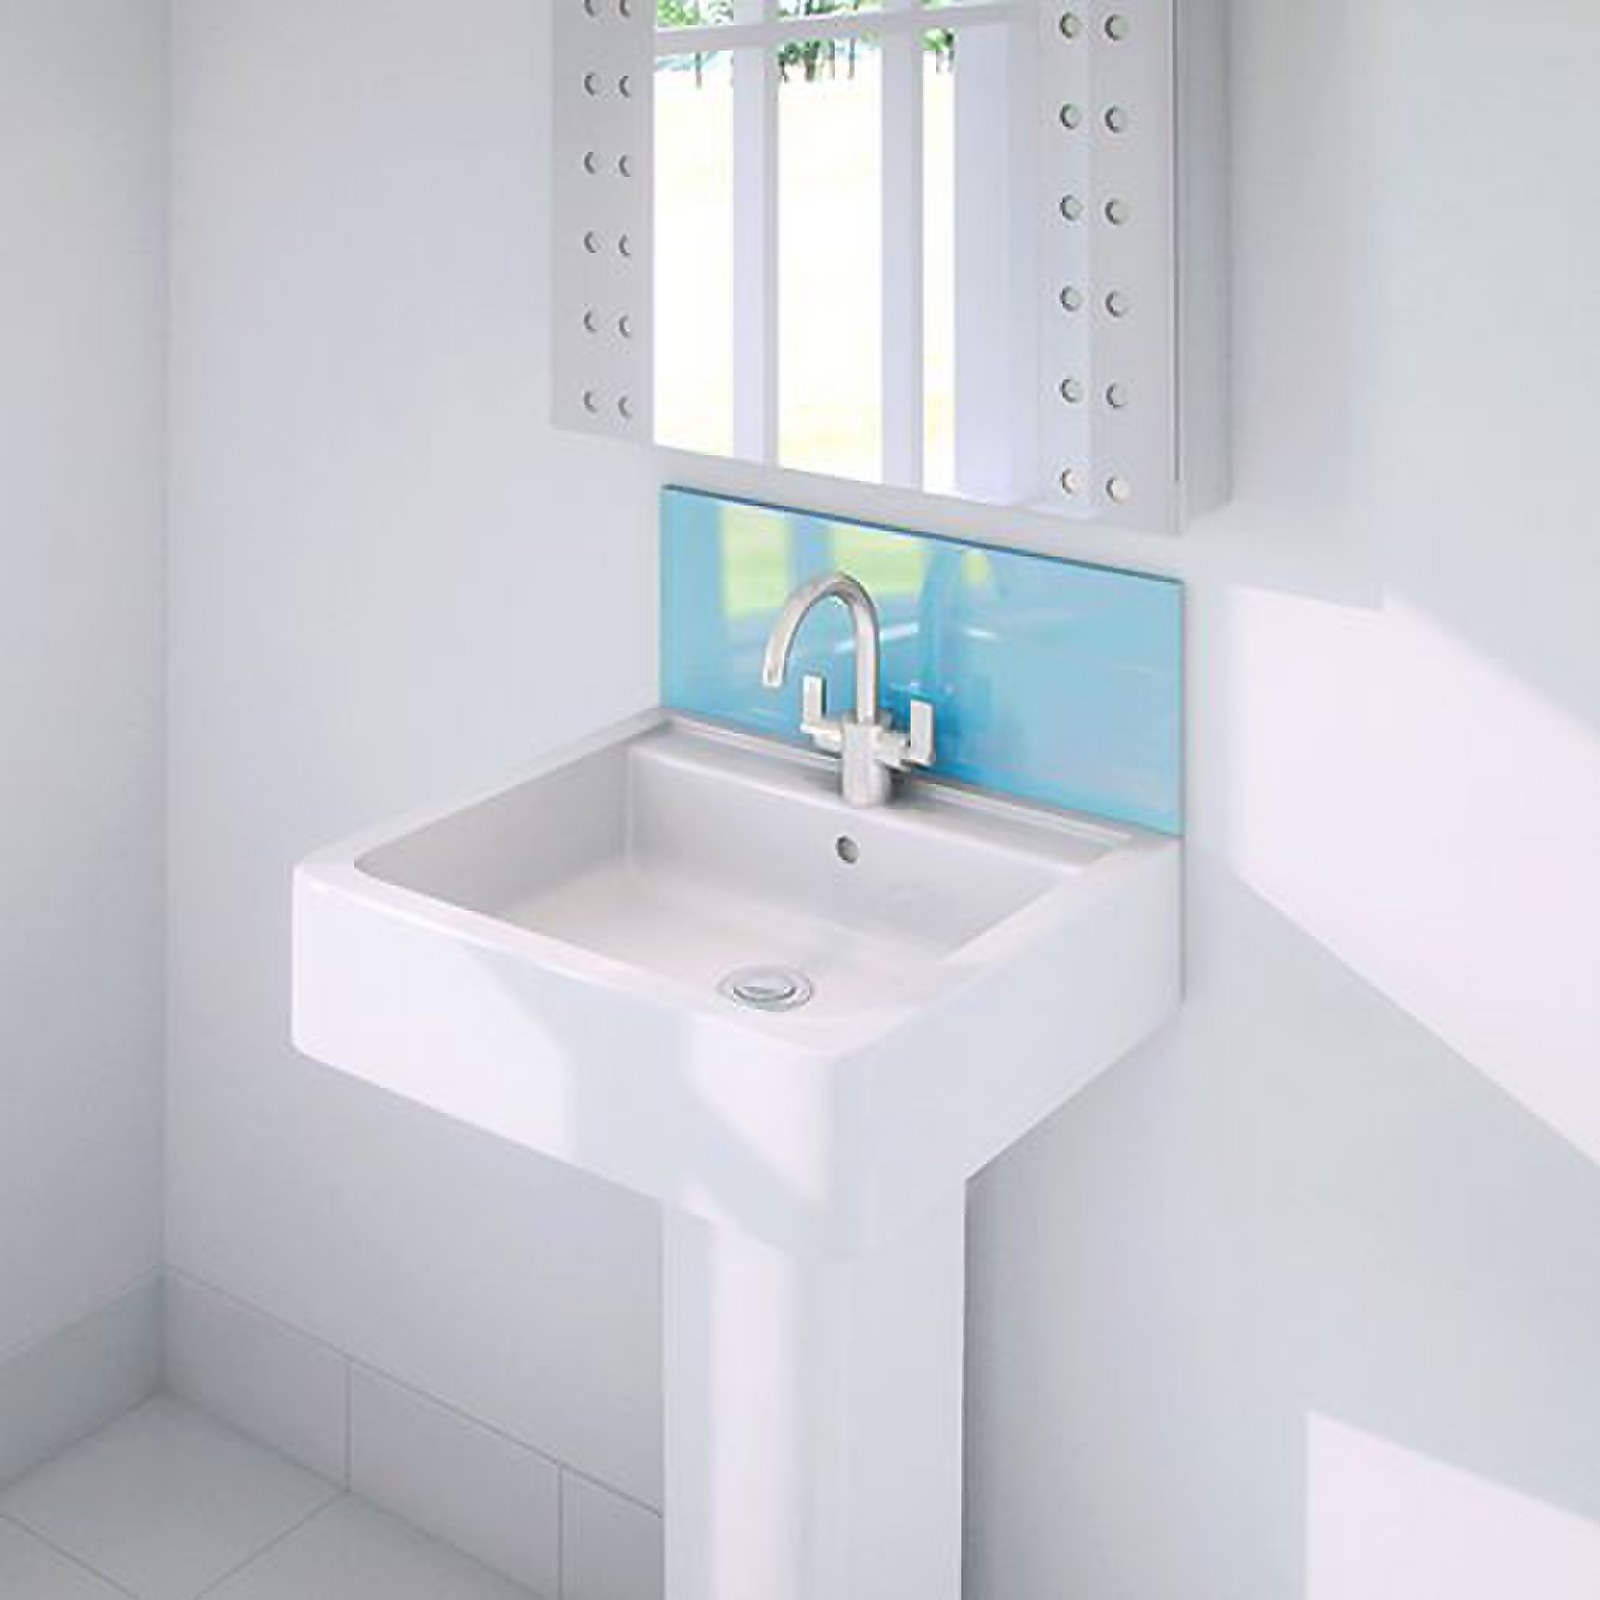 Photo of Wetwall Upstand - 600 X 200mm - Essence - Glass